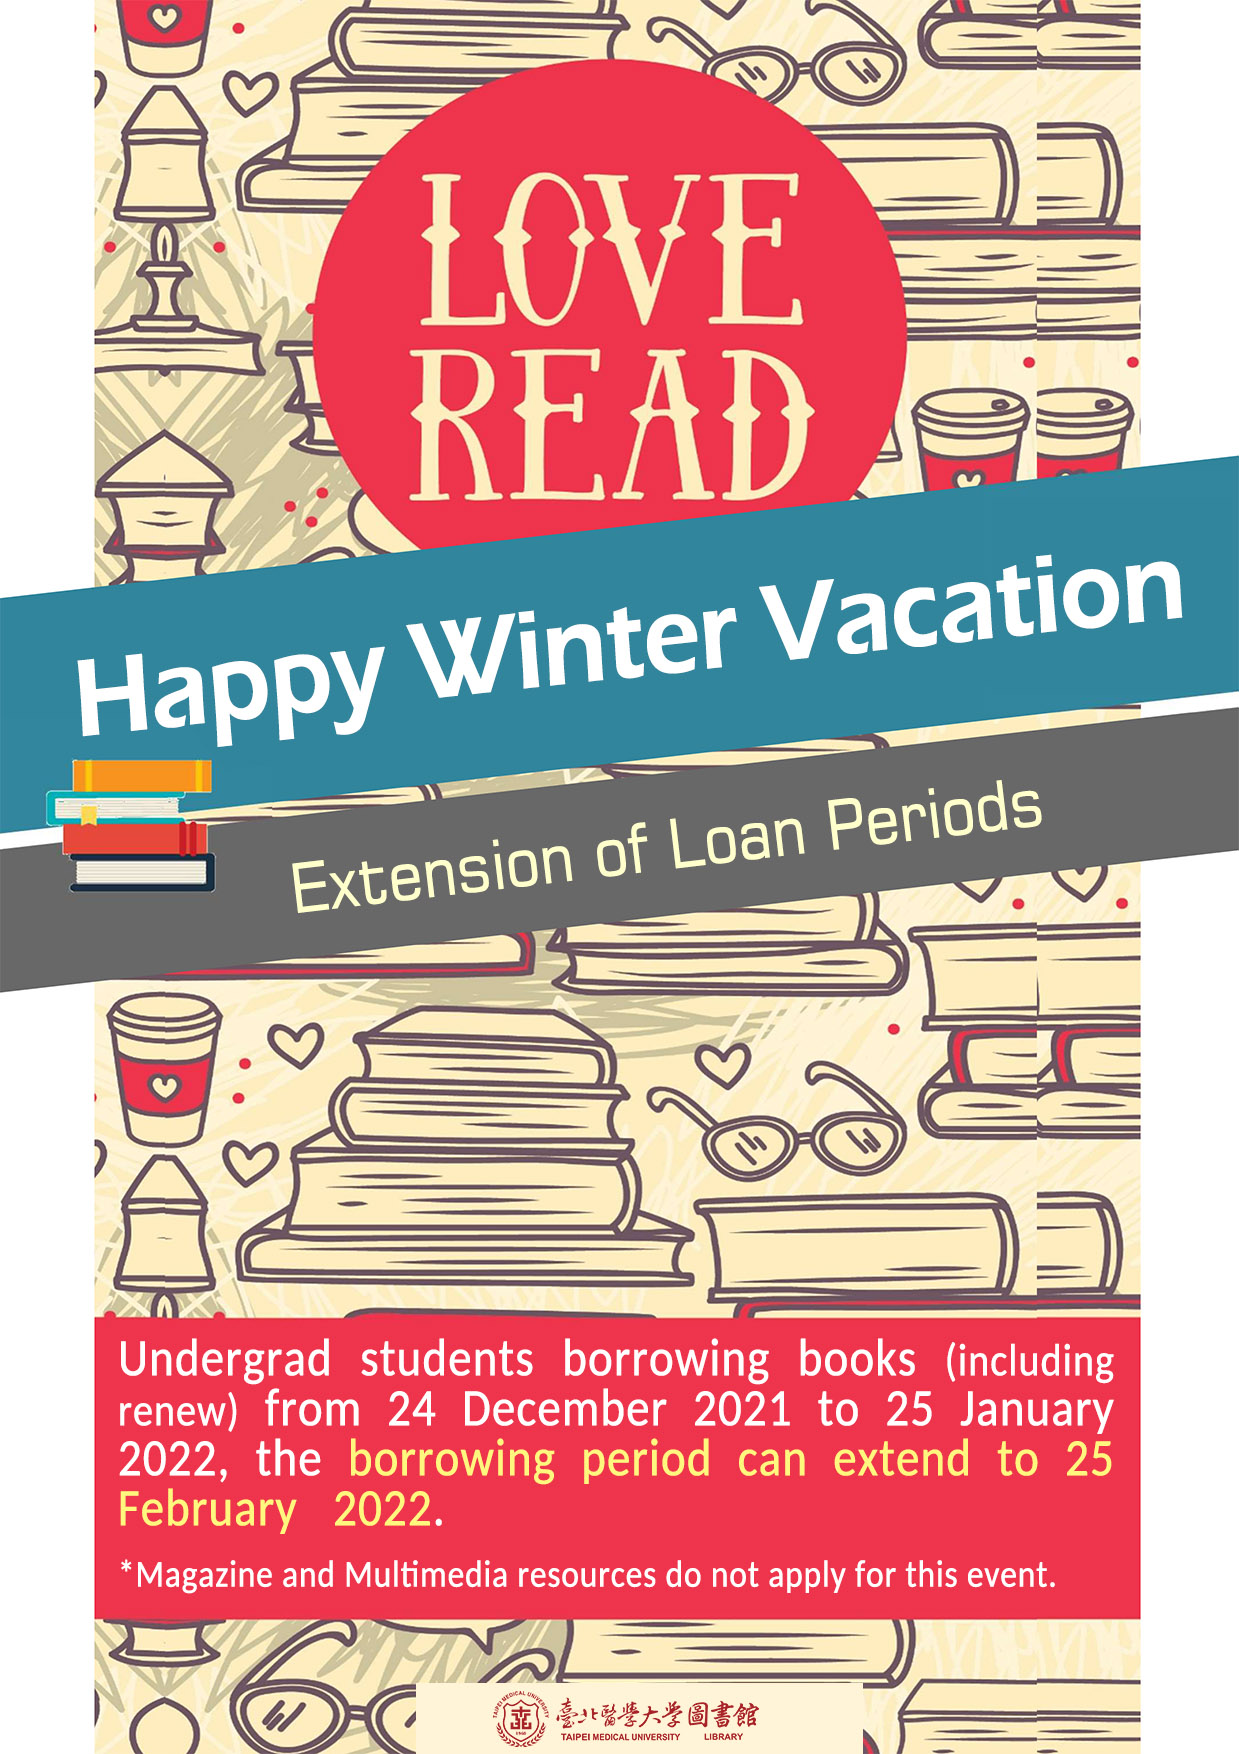 Extension of Loan Periods